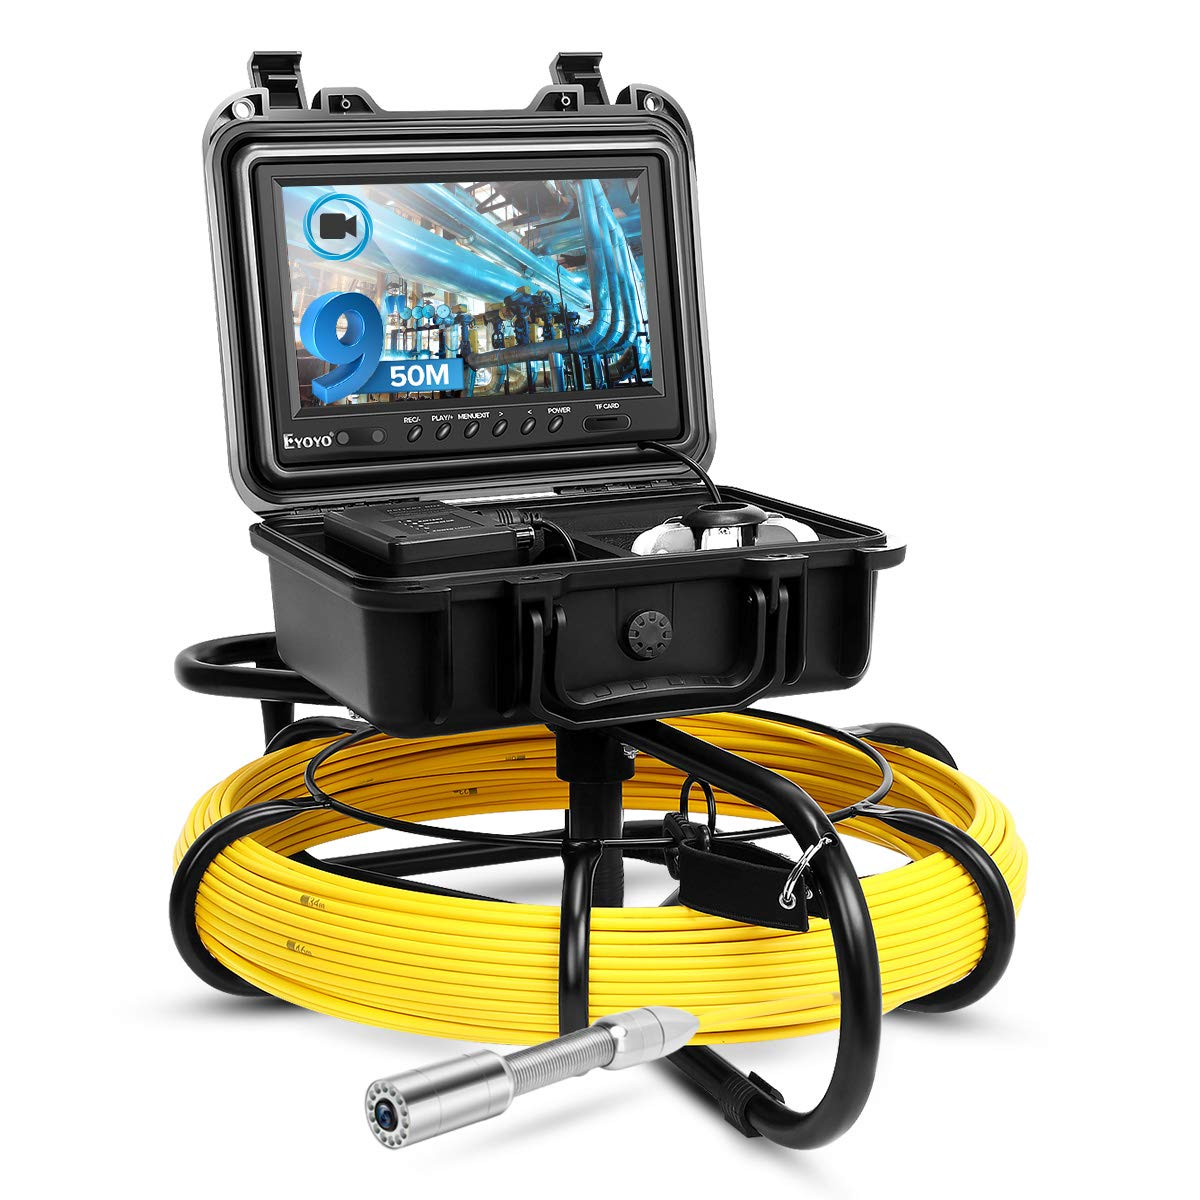 Eyoyo Pipeline Endoscope Inspection Camera 50M/164ft Underwater Industrial Pipe Sewer Drain Wall Video Plumbing System with 9 Inch LCD Monitor 1000TVL DVR Recorder Snake Cam with 8GB SD Card Included